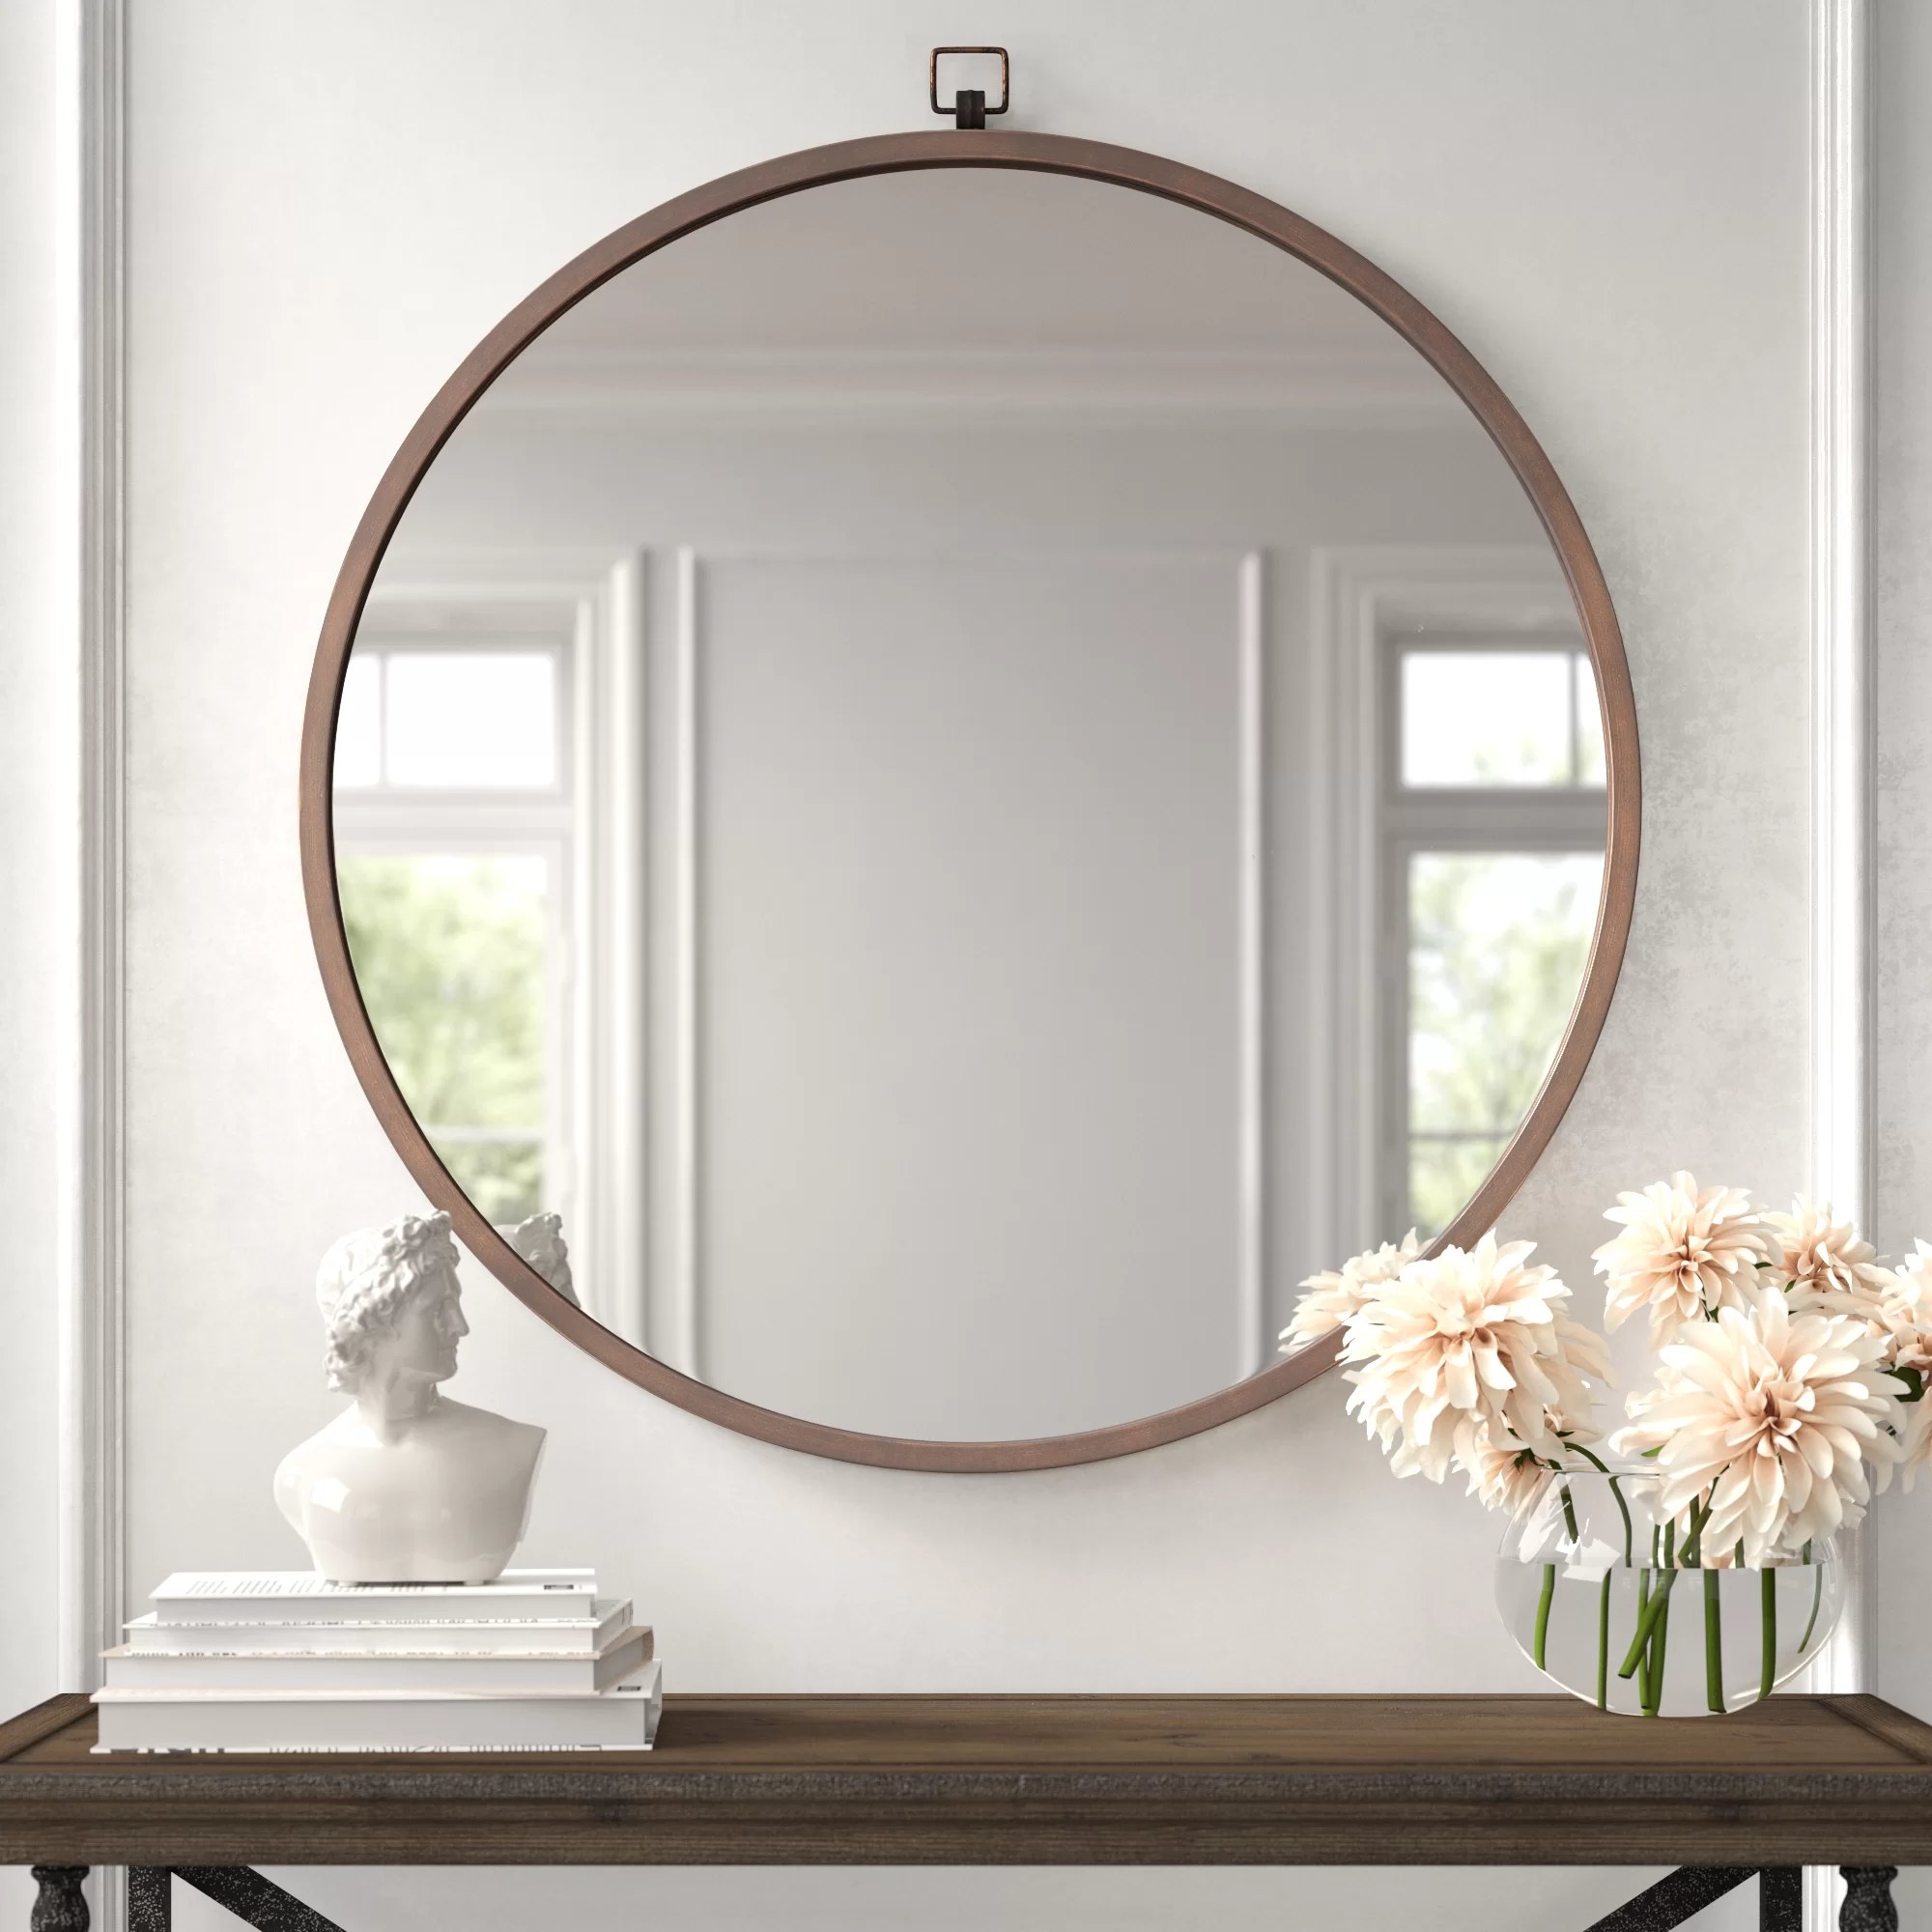 The circular mirror hanging in an entryway